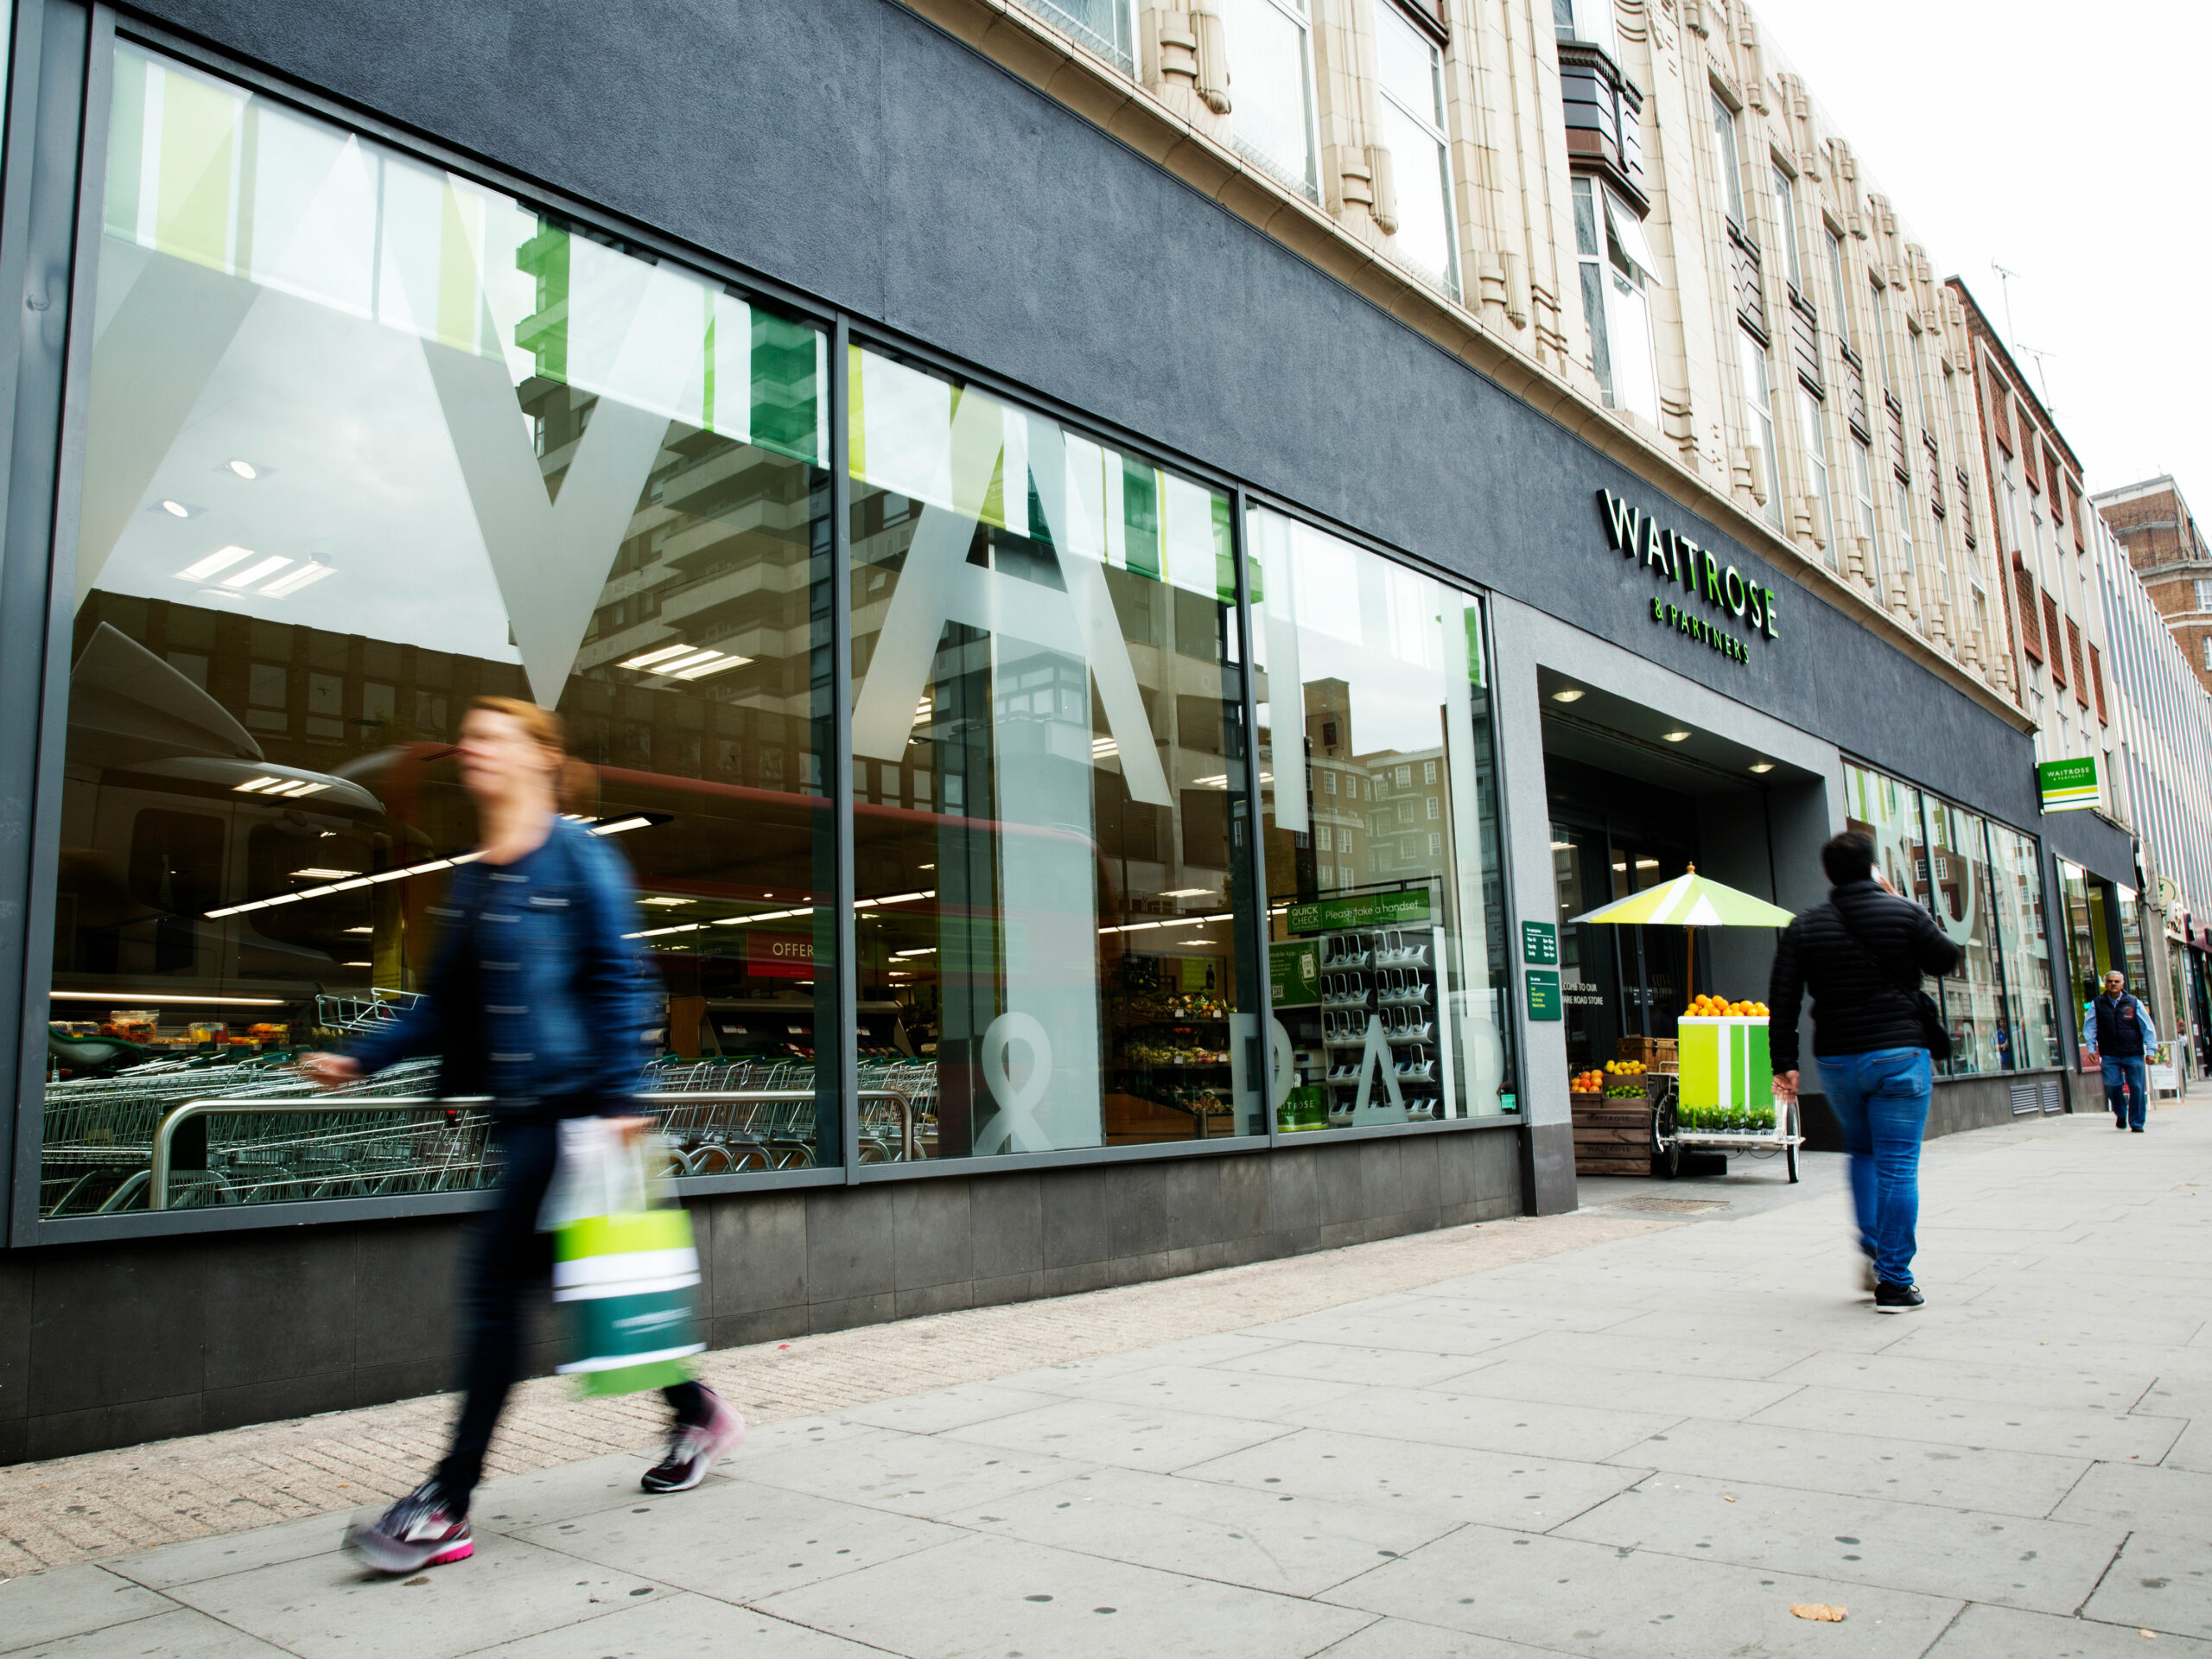 Debenhams, M&S, and John Lewis join Next and New Look to slash prices by up  to 70% to shift £15bn leftover stock